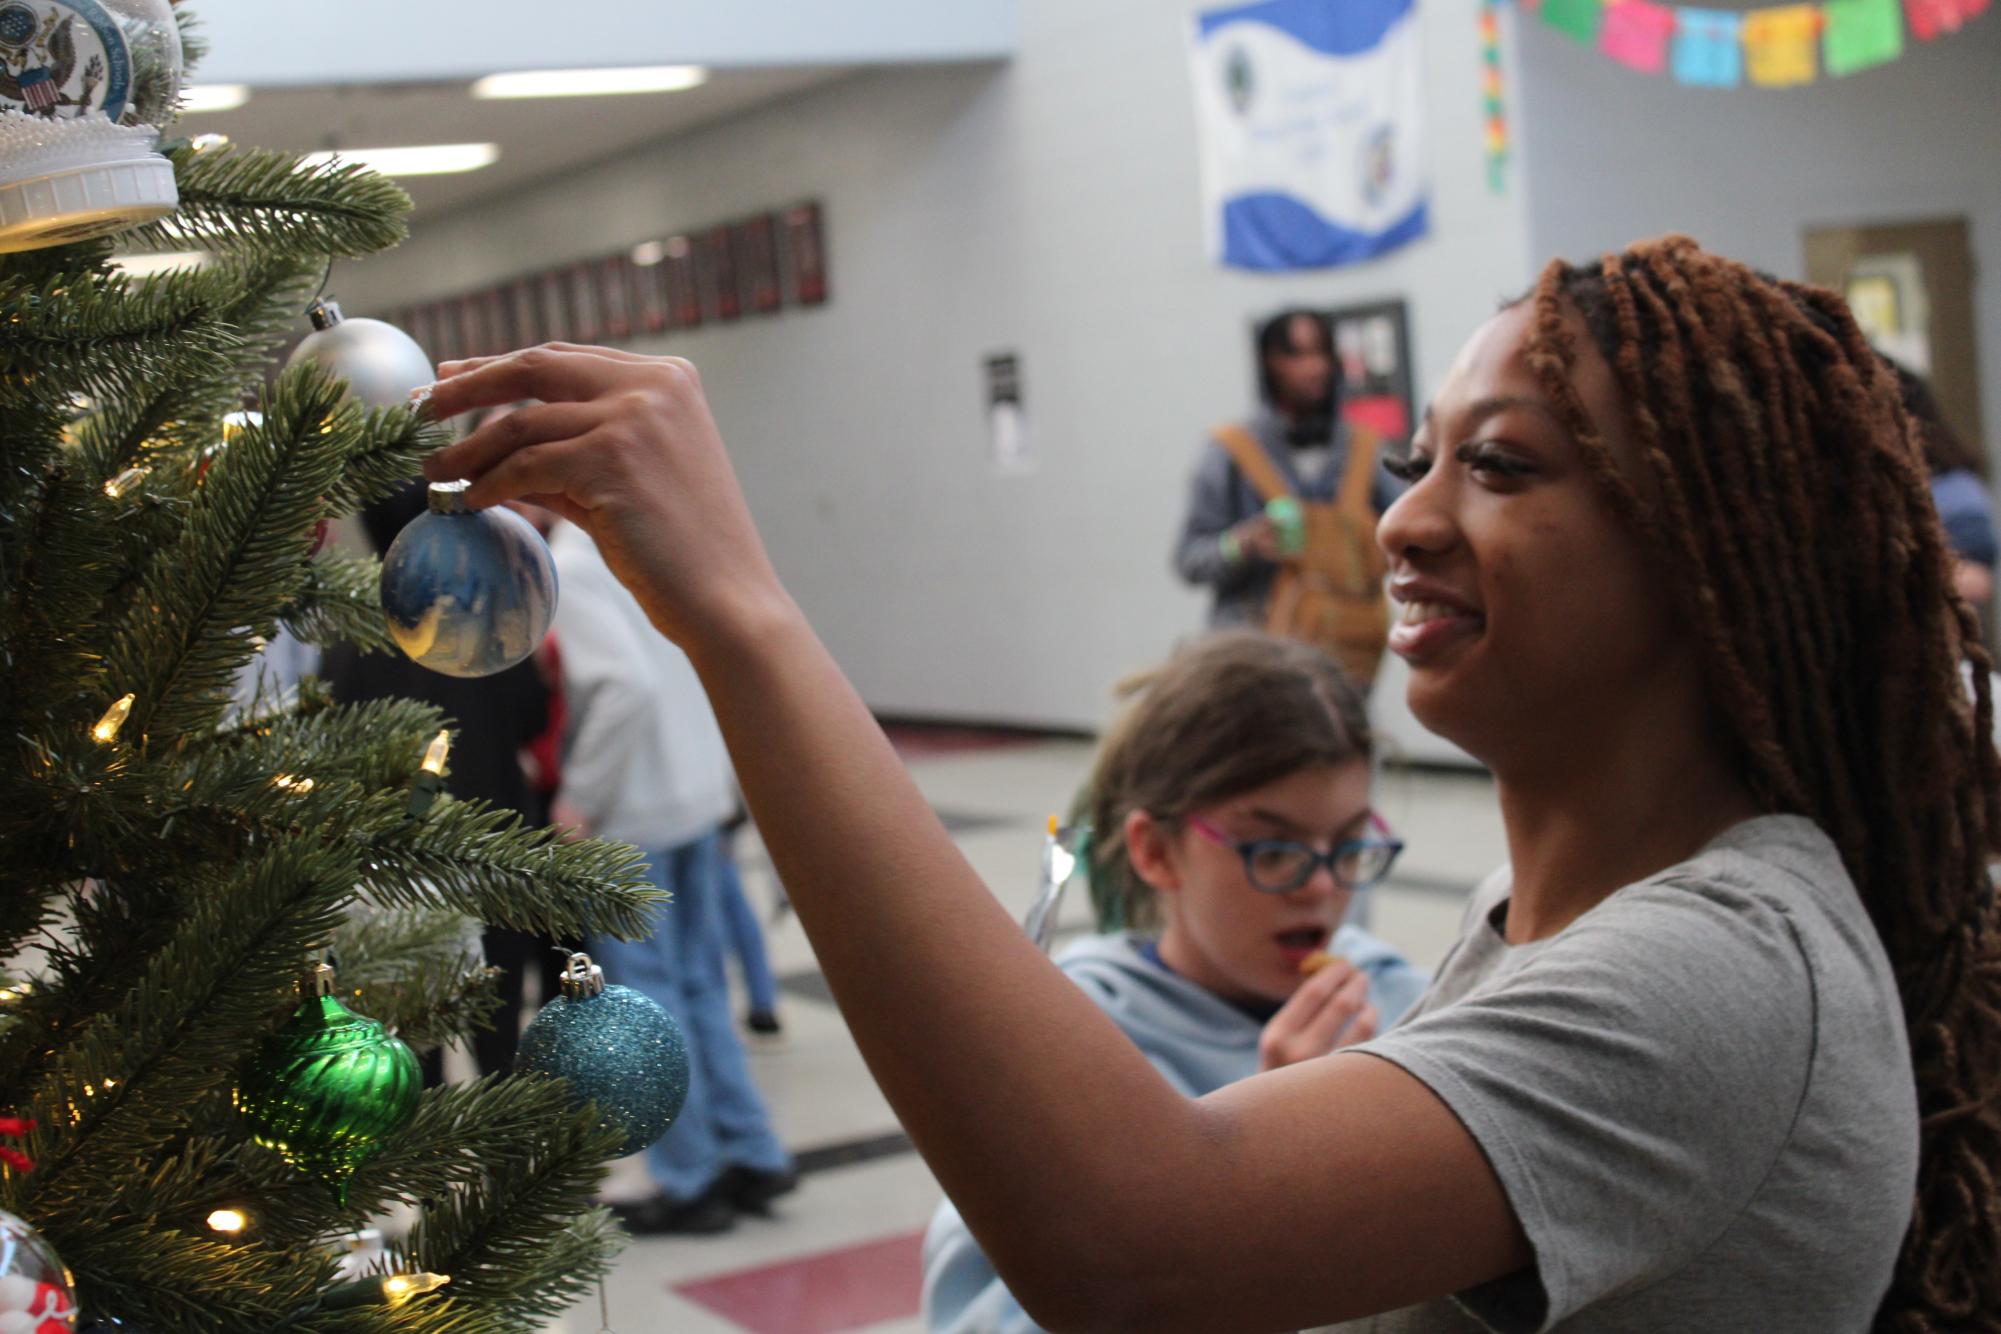 On+Wednesday%2C+November+29th%2C+Center+Hill+High+Schools+student+council+held+its+annual+Christmas+Tree+decorating+party.+Mustangs+were+invited+to+stay+after+school+to+help+decorate+the+tree%2C+set+up+in+the+commons.